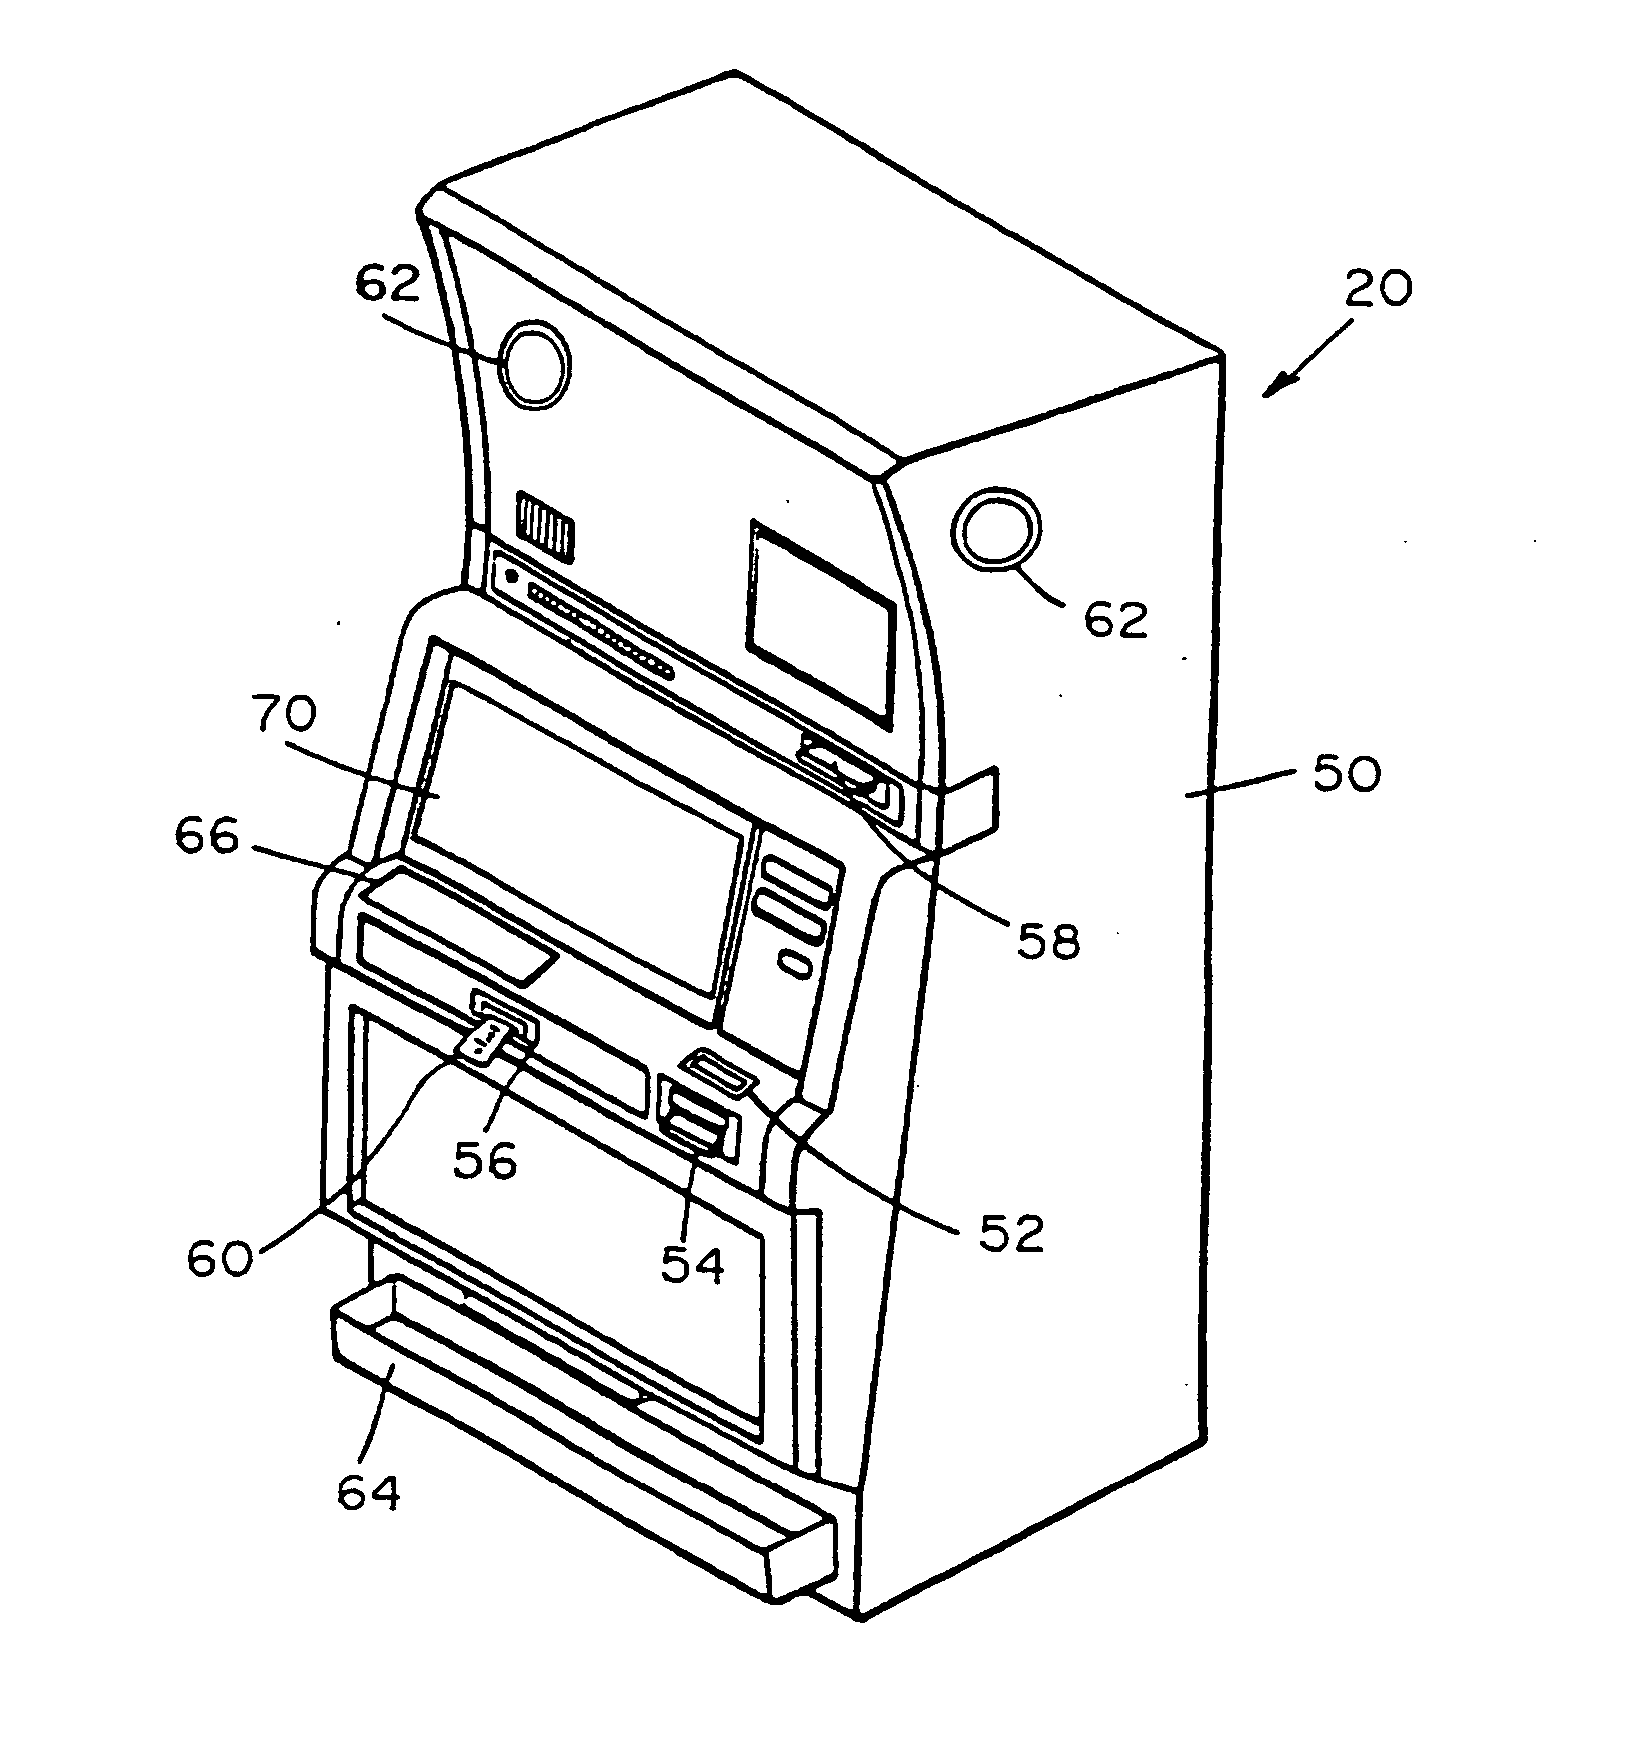 Apparatus and methods for continuous game play during a lockup in a gaming apparatus